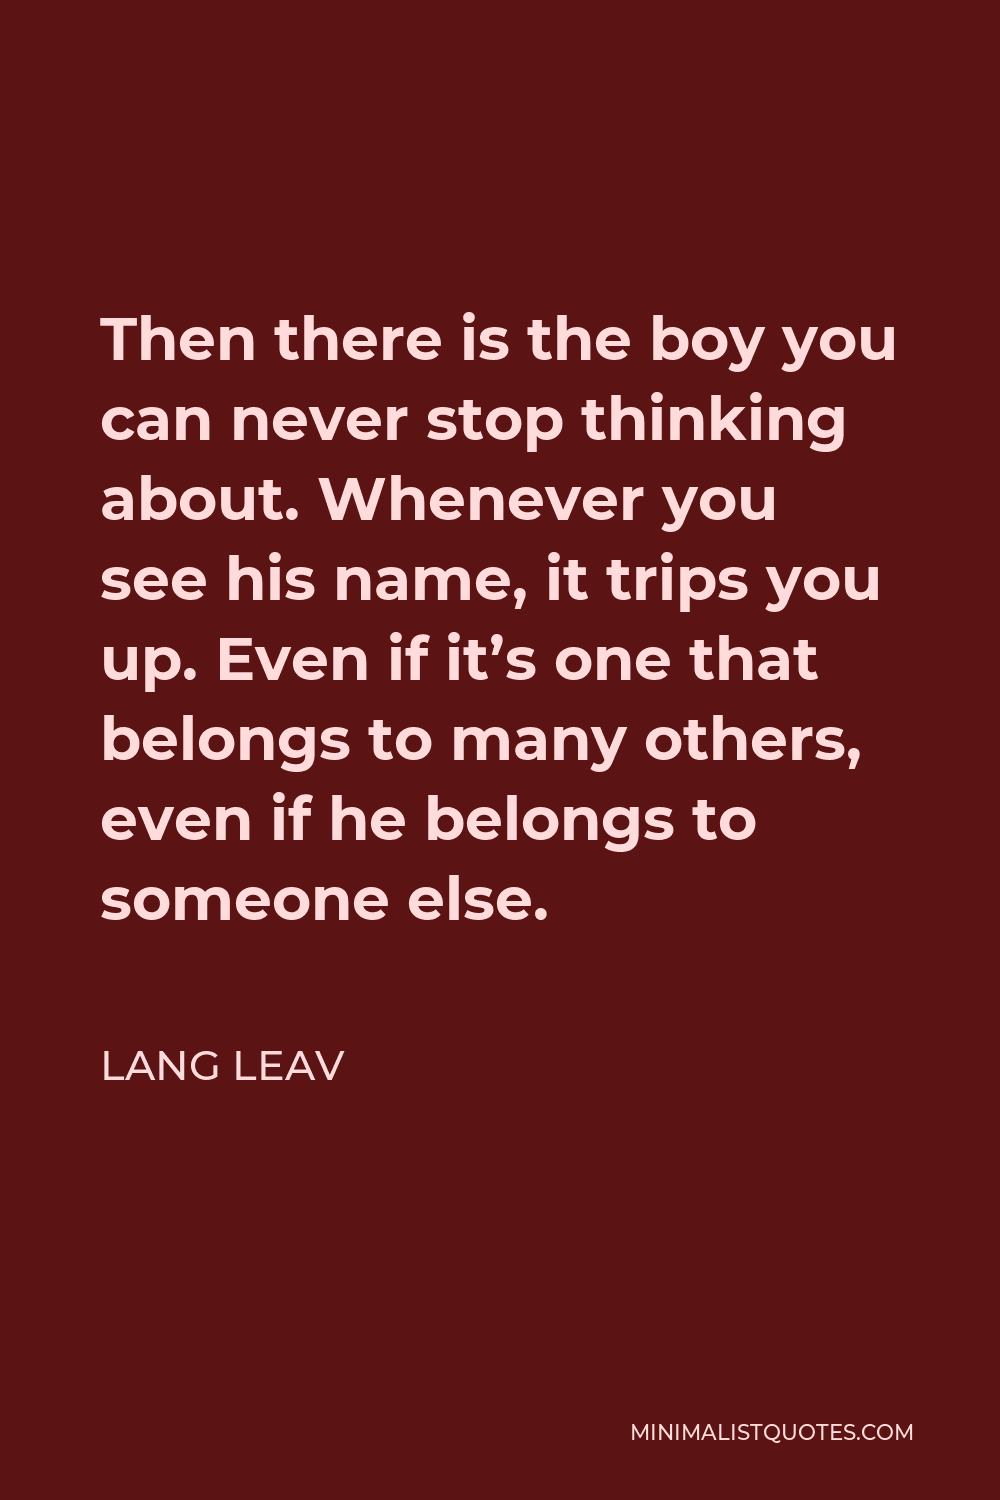 Lang Leav Quote - Then there is the boy you can never stop thinking about. Whenever you see his name, it trips you up. Even if it’s one that belongs to many others, even if he belongs to someone else.